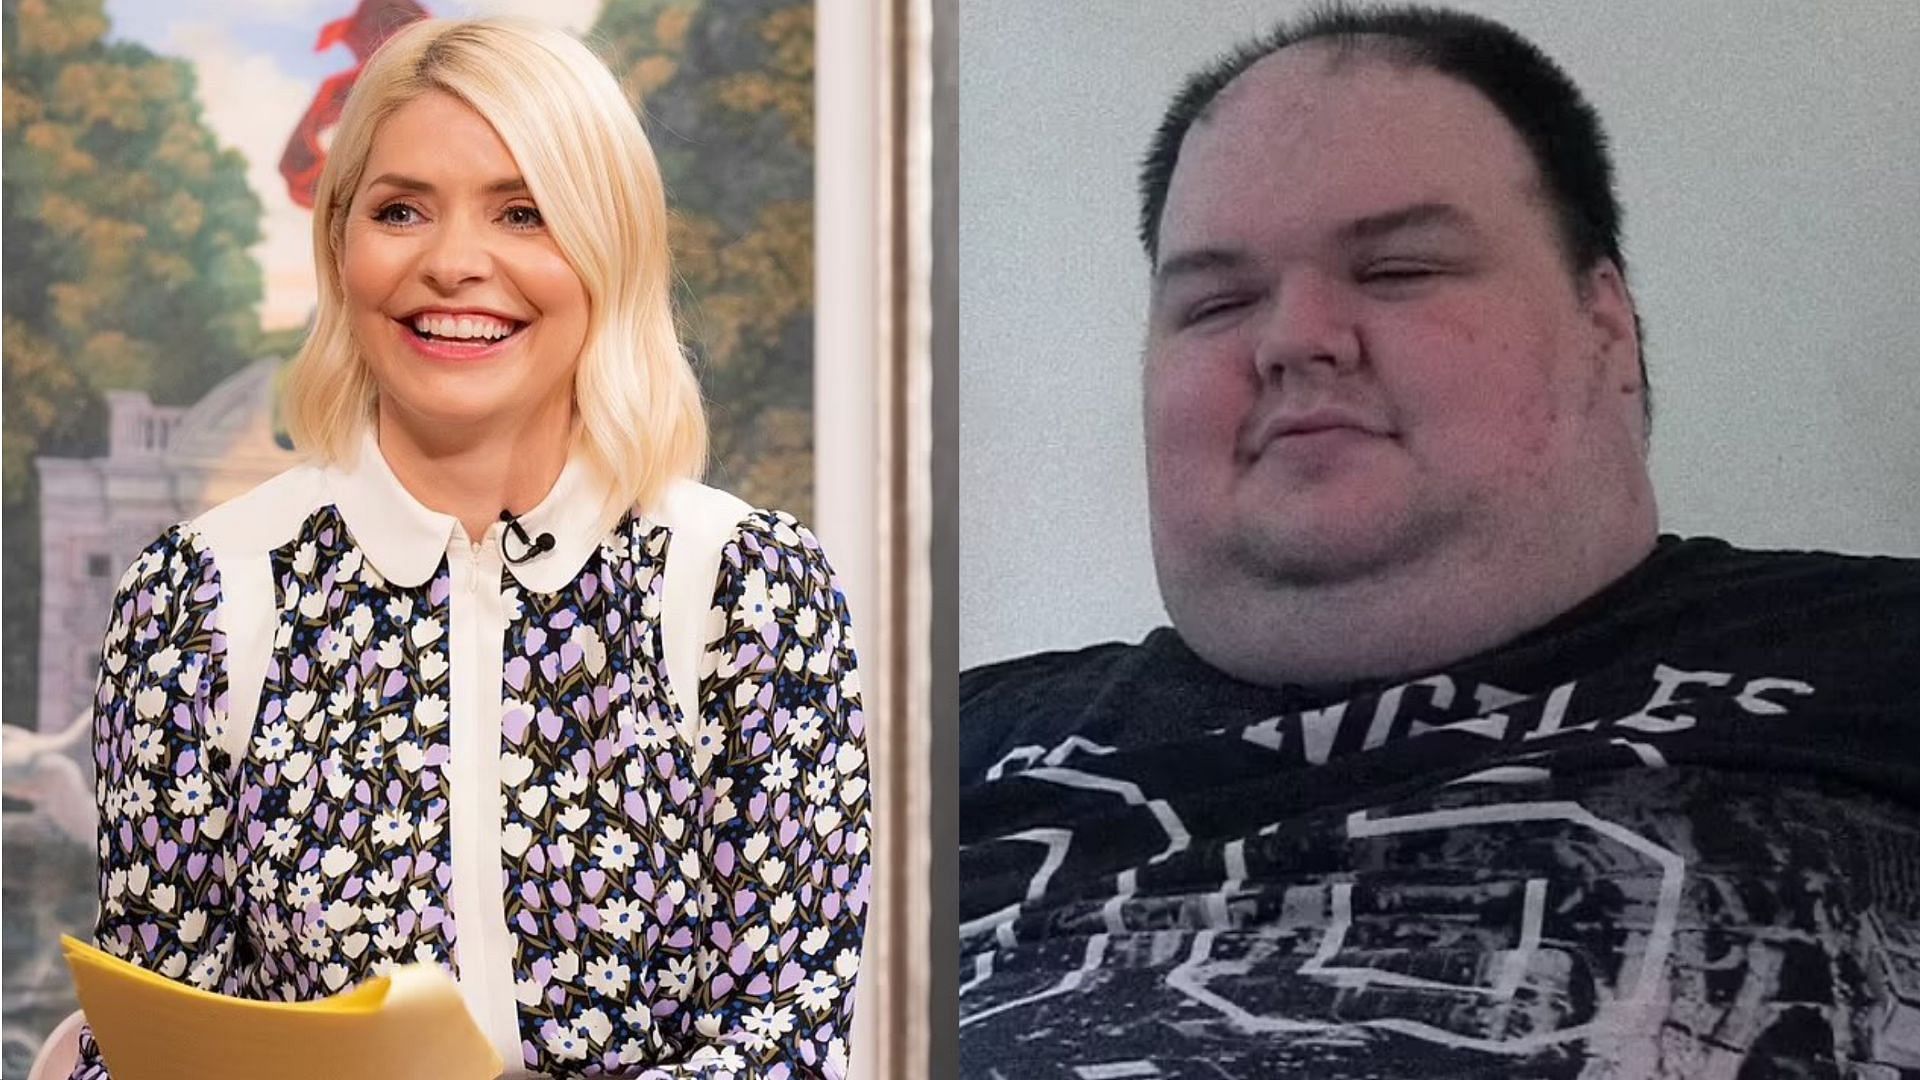 Holly Willoughby was under police guard protection. (Images via Instagram/@hollywilloughby &amp; Twitter/@MGonigle)